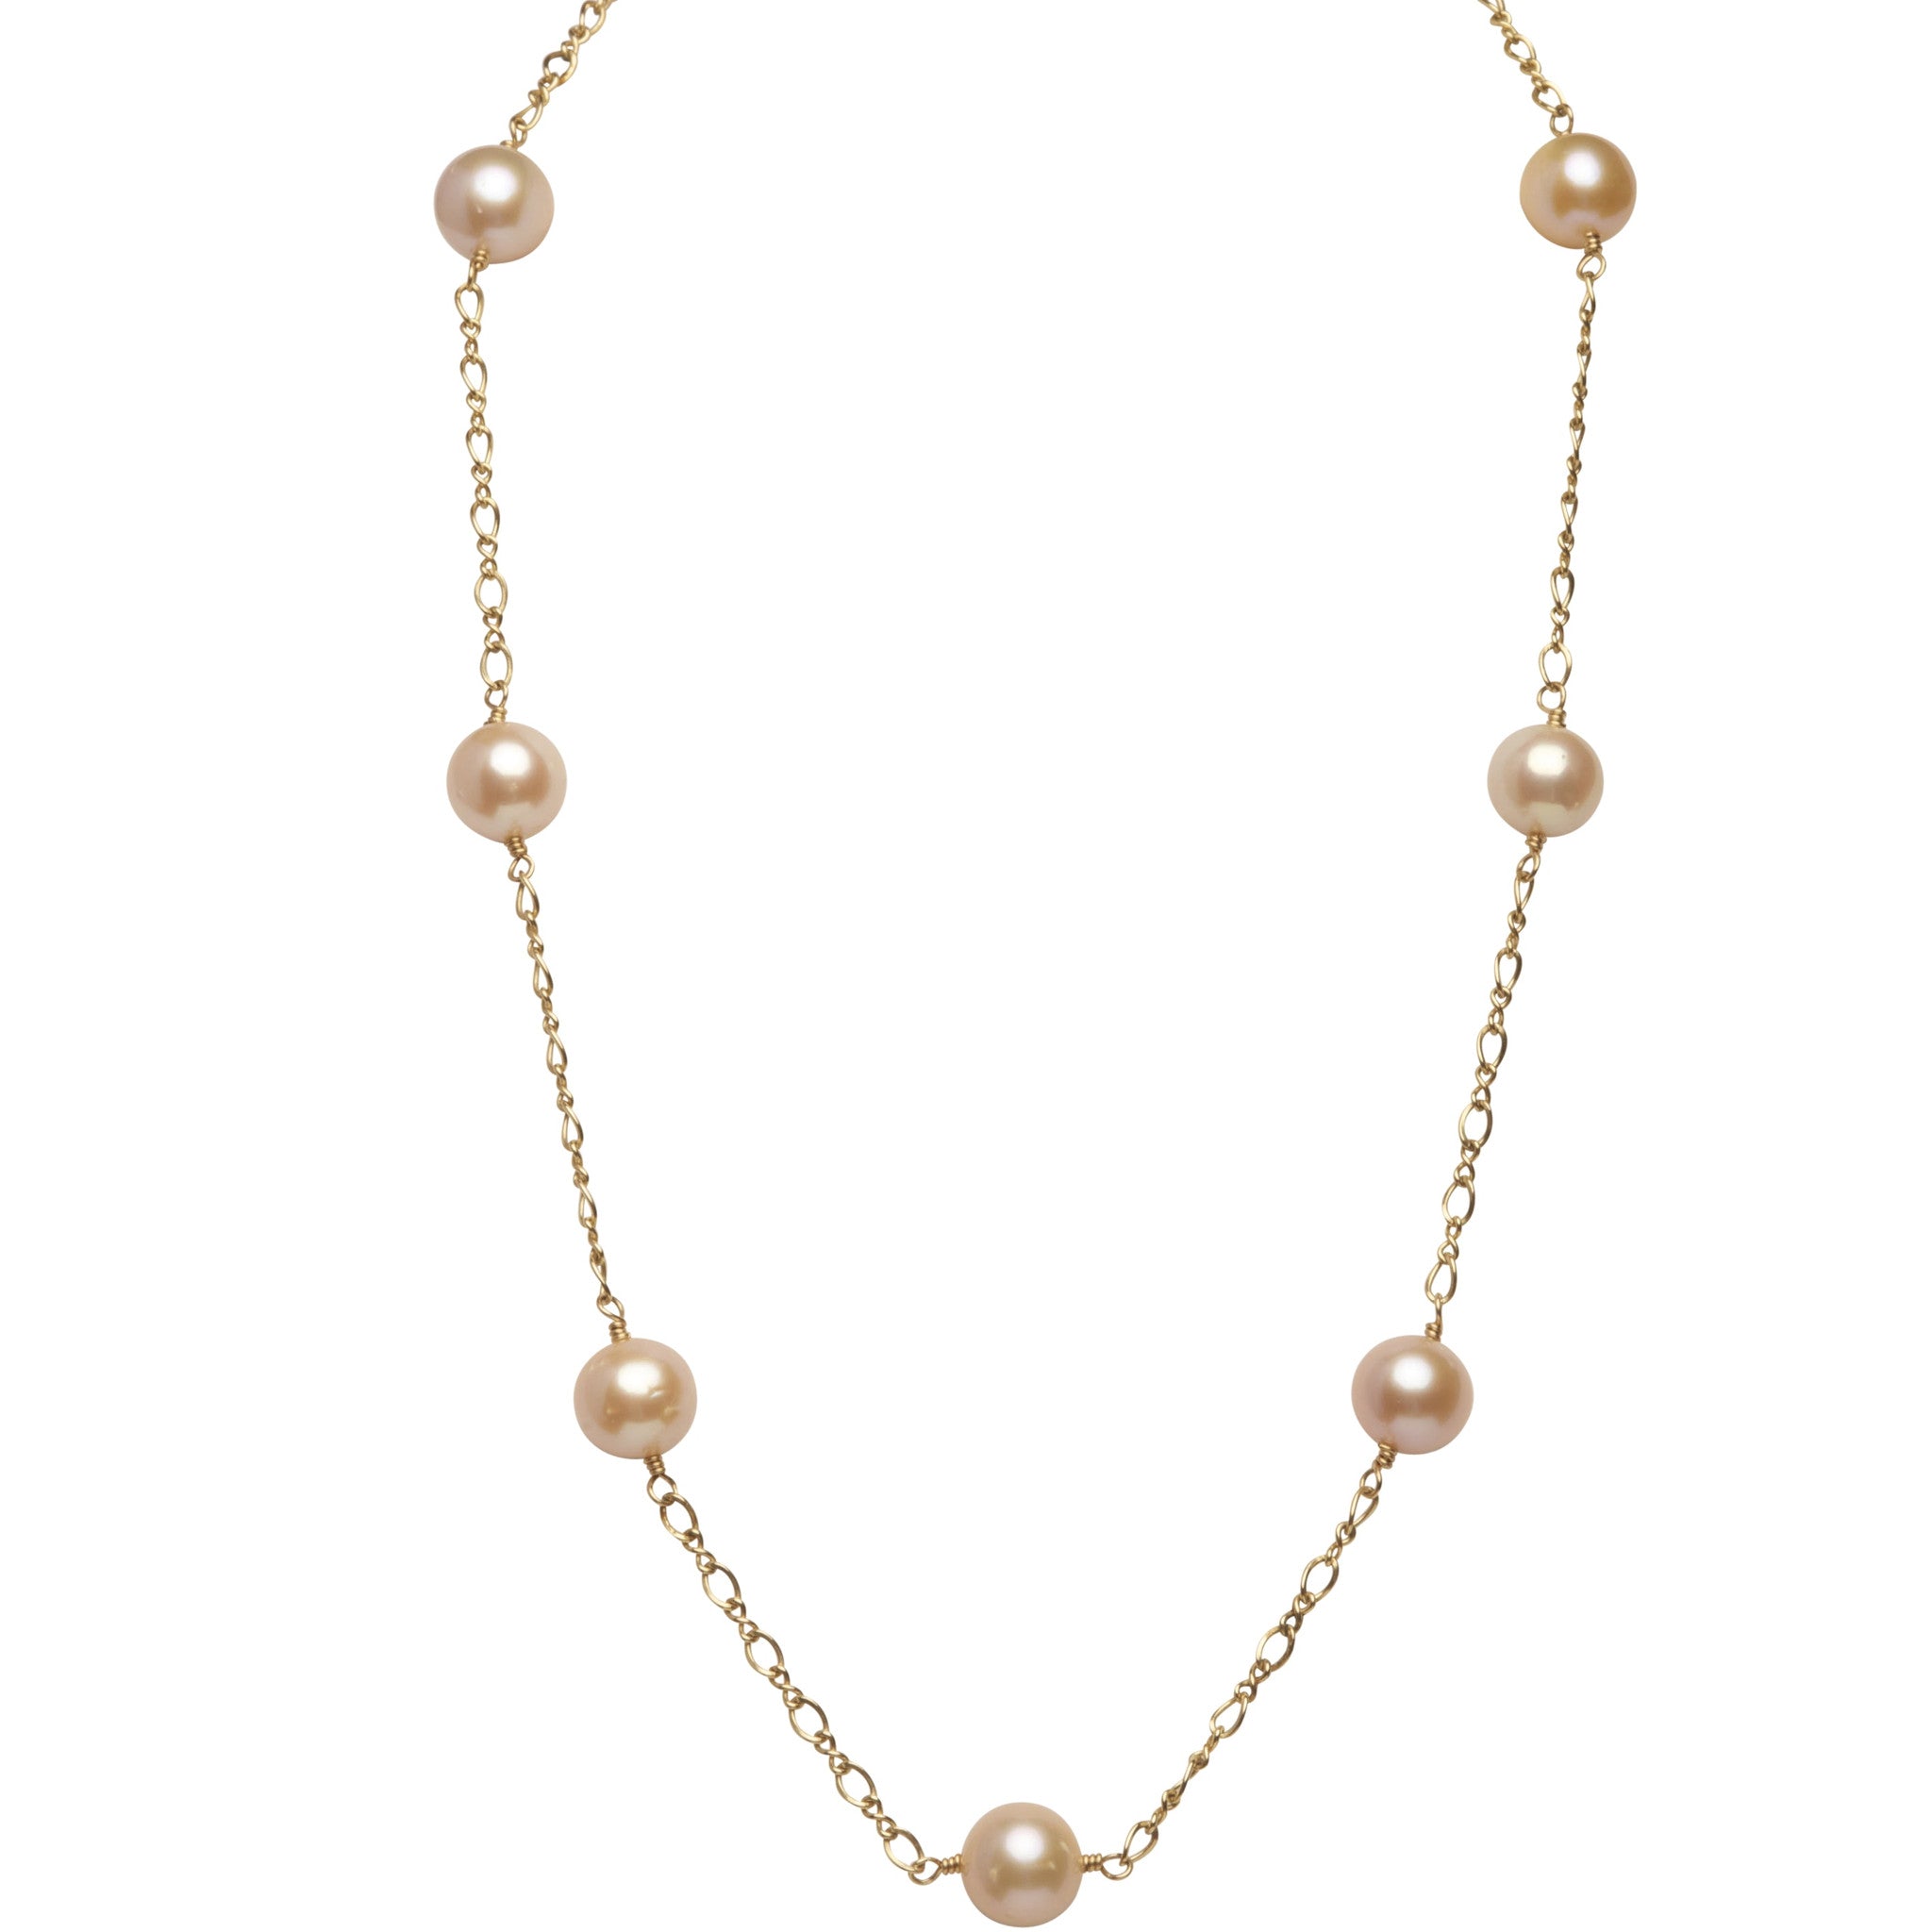 Rene Russo Tin Cup Necklace On Sale, SAVE 55%, 43% OFF